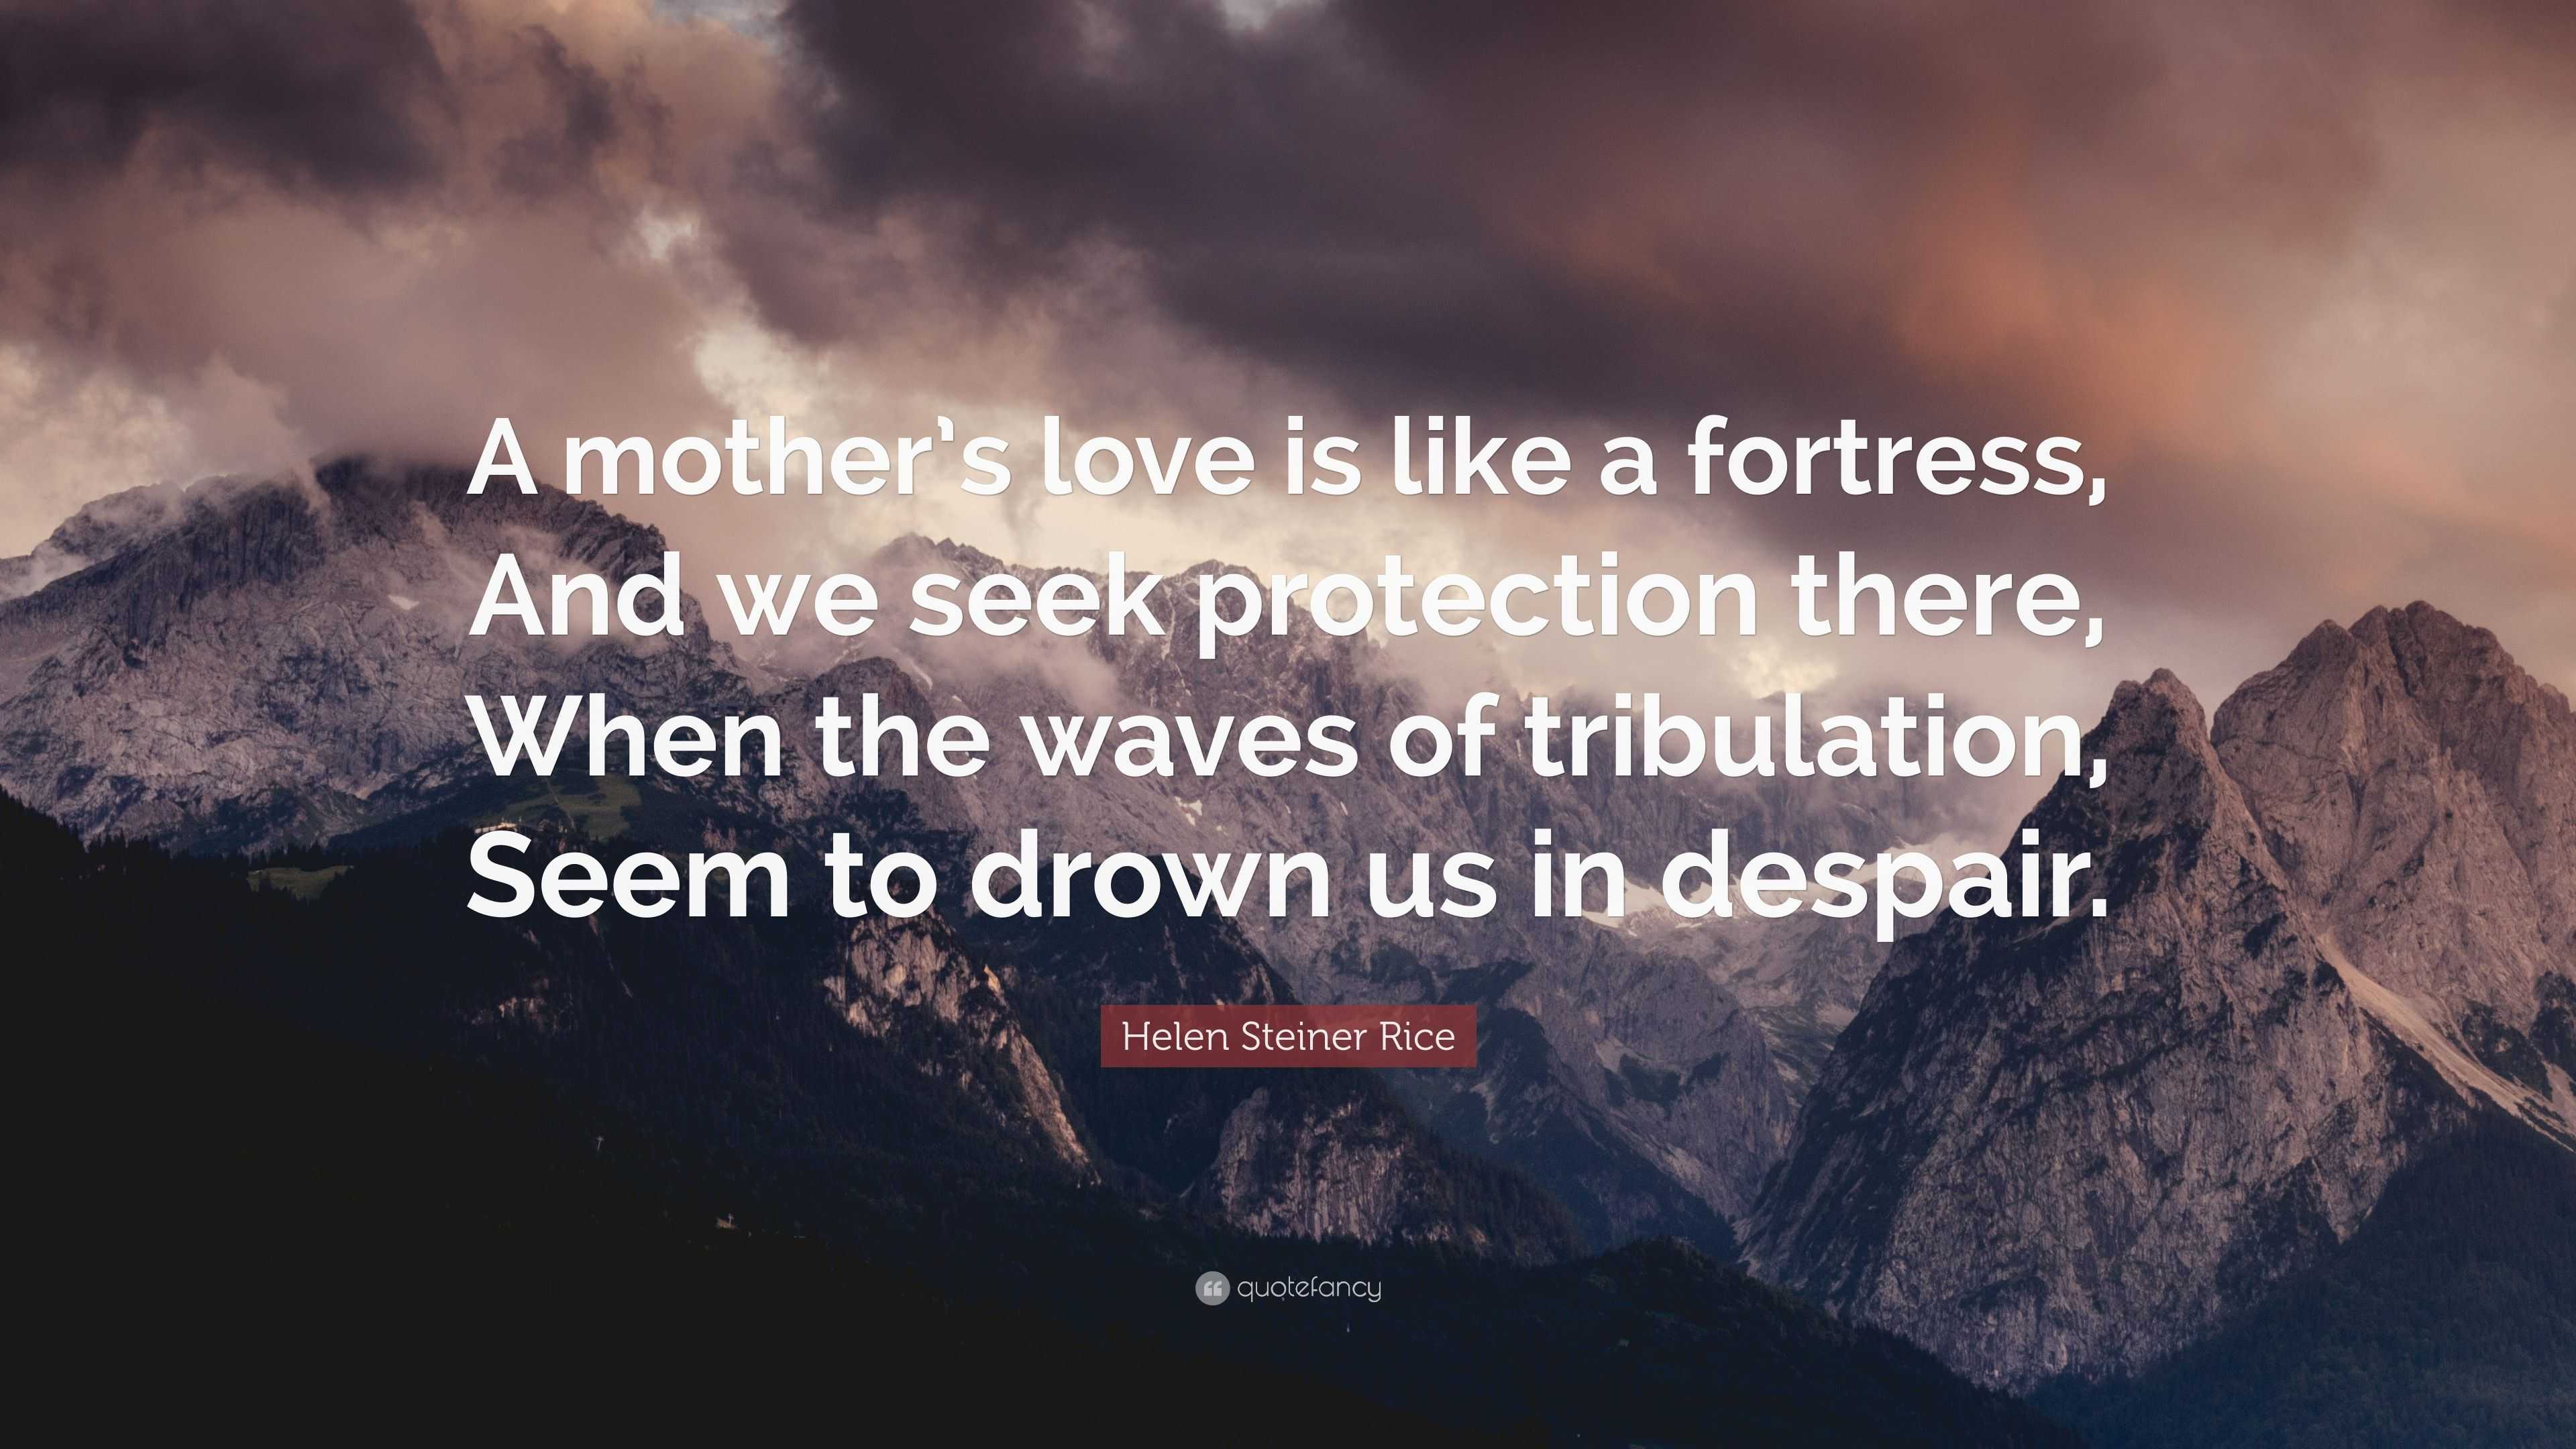 Helen Steiner Rice Quote: "A mother's love is like a ...